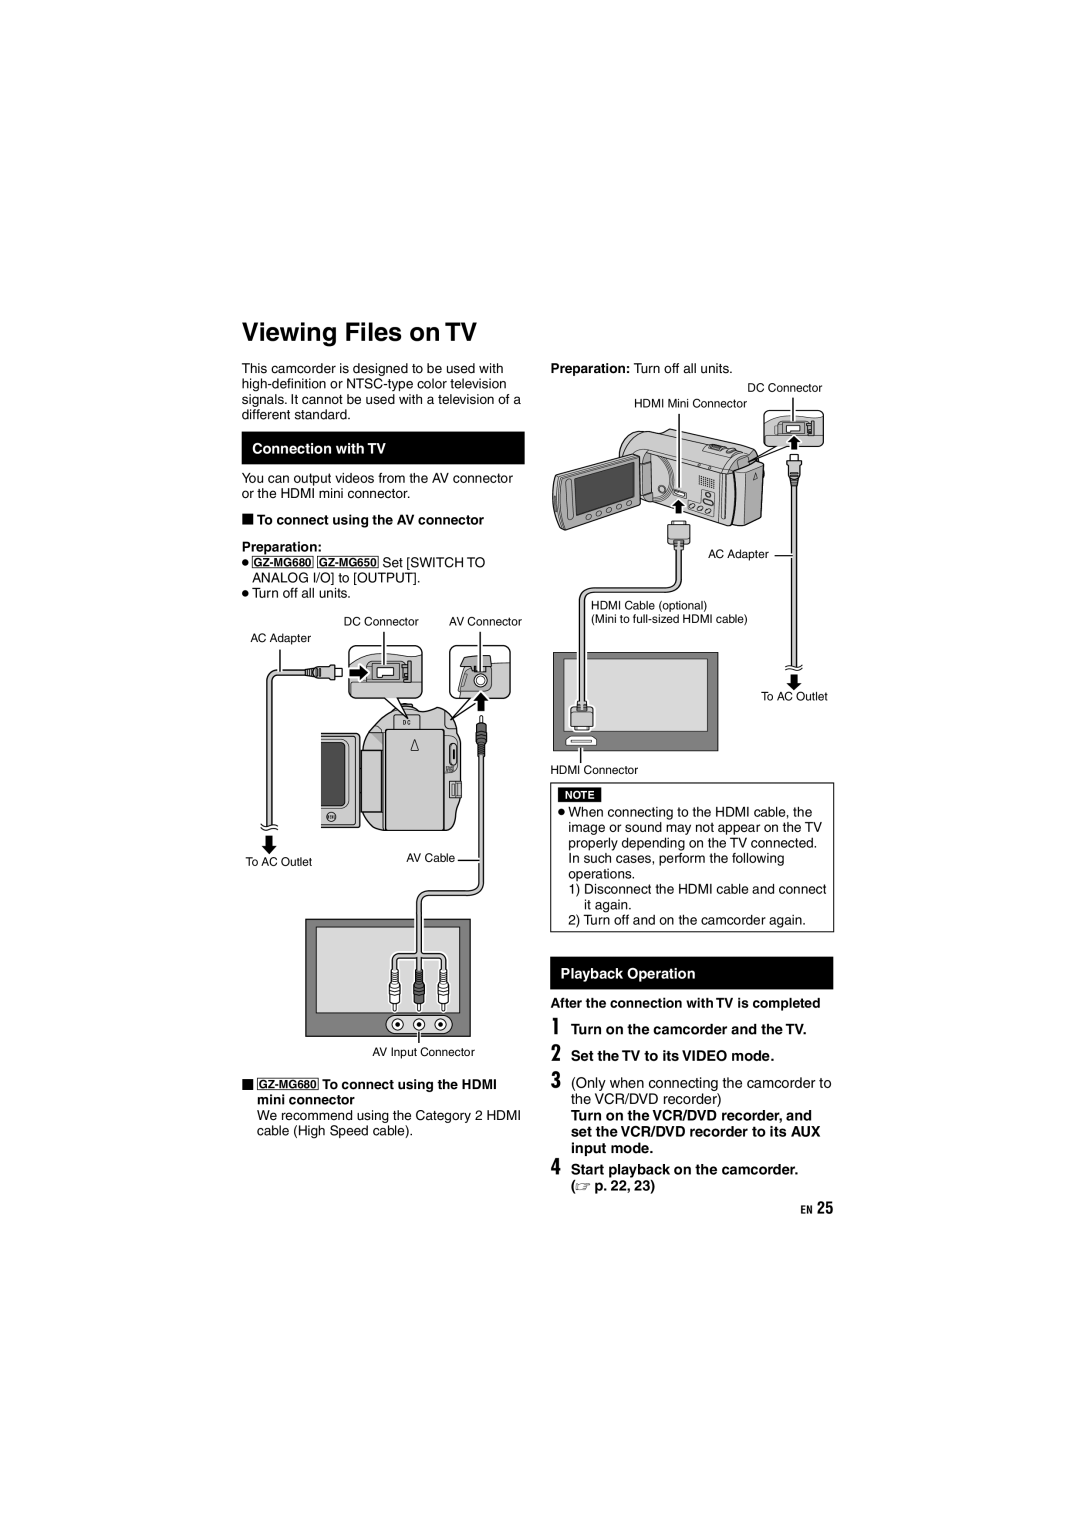 JVC GZ-MG680, GZ-MG650 Viewing Files on TV, Connection with TV, Playback Operation, Start playback on the camcorder. p. 22 